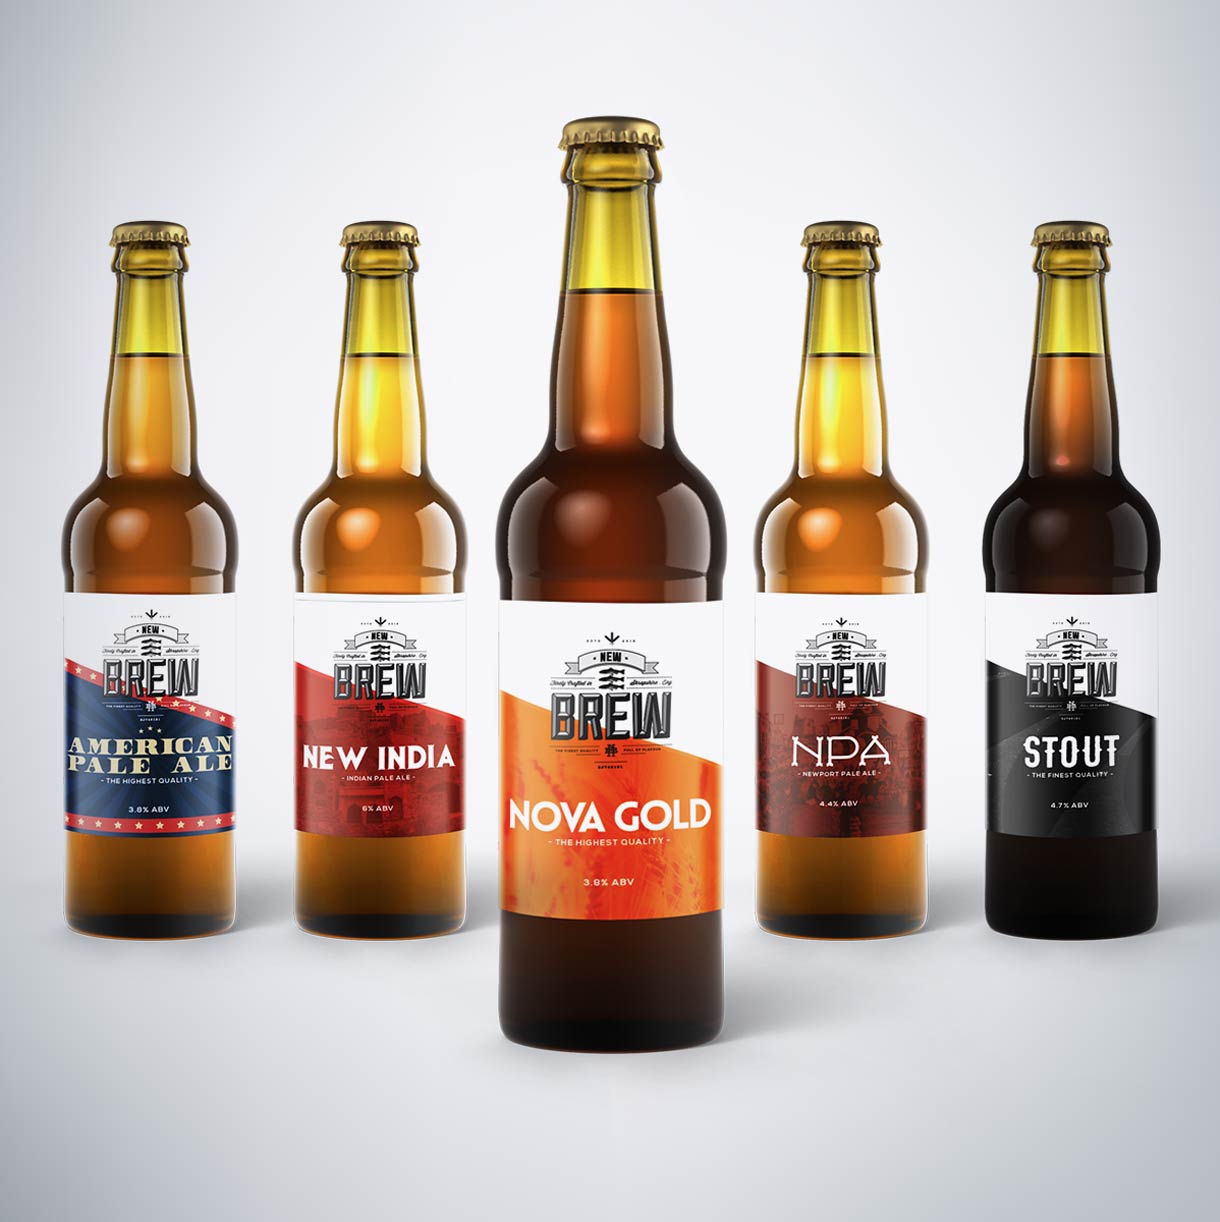 A range of design concepts for the New Brew beer bottles